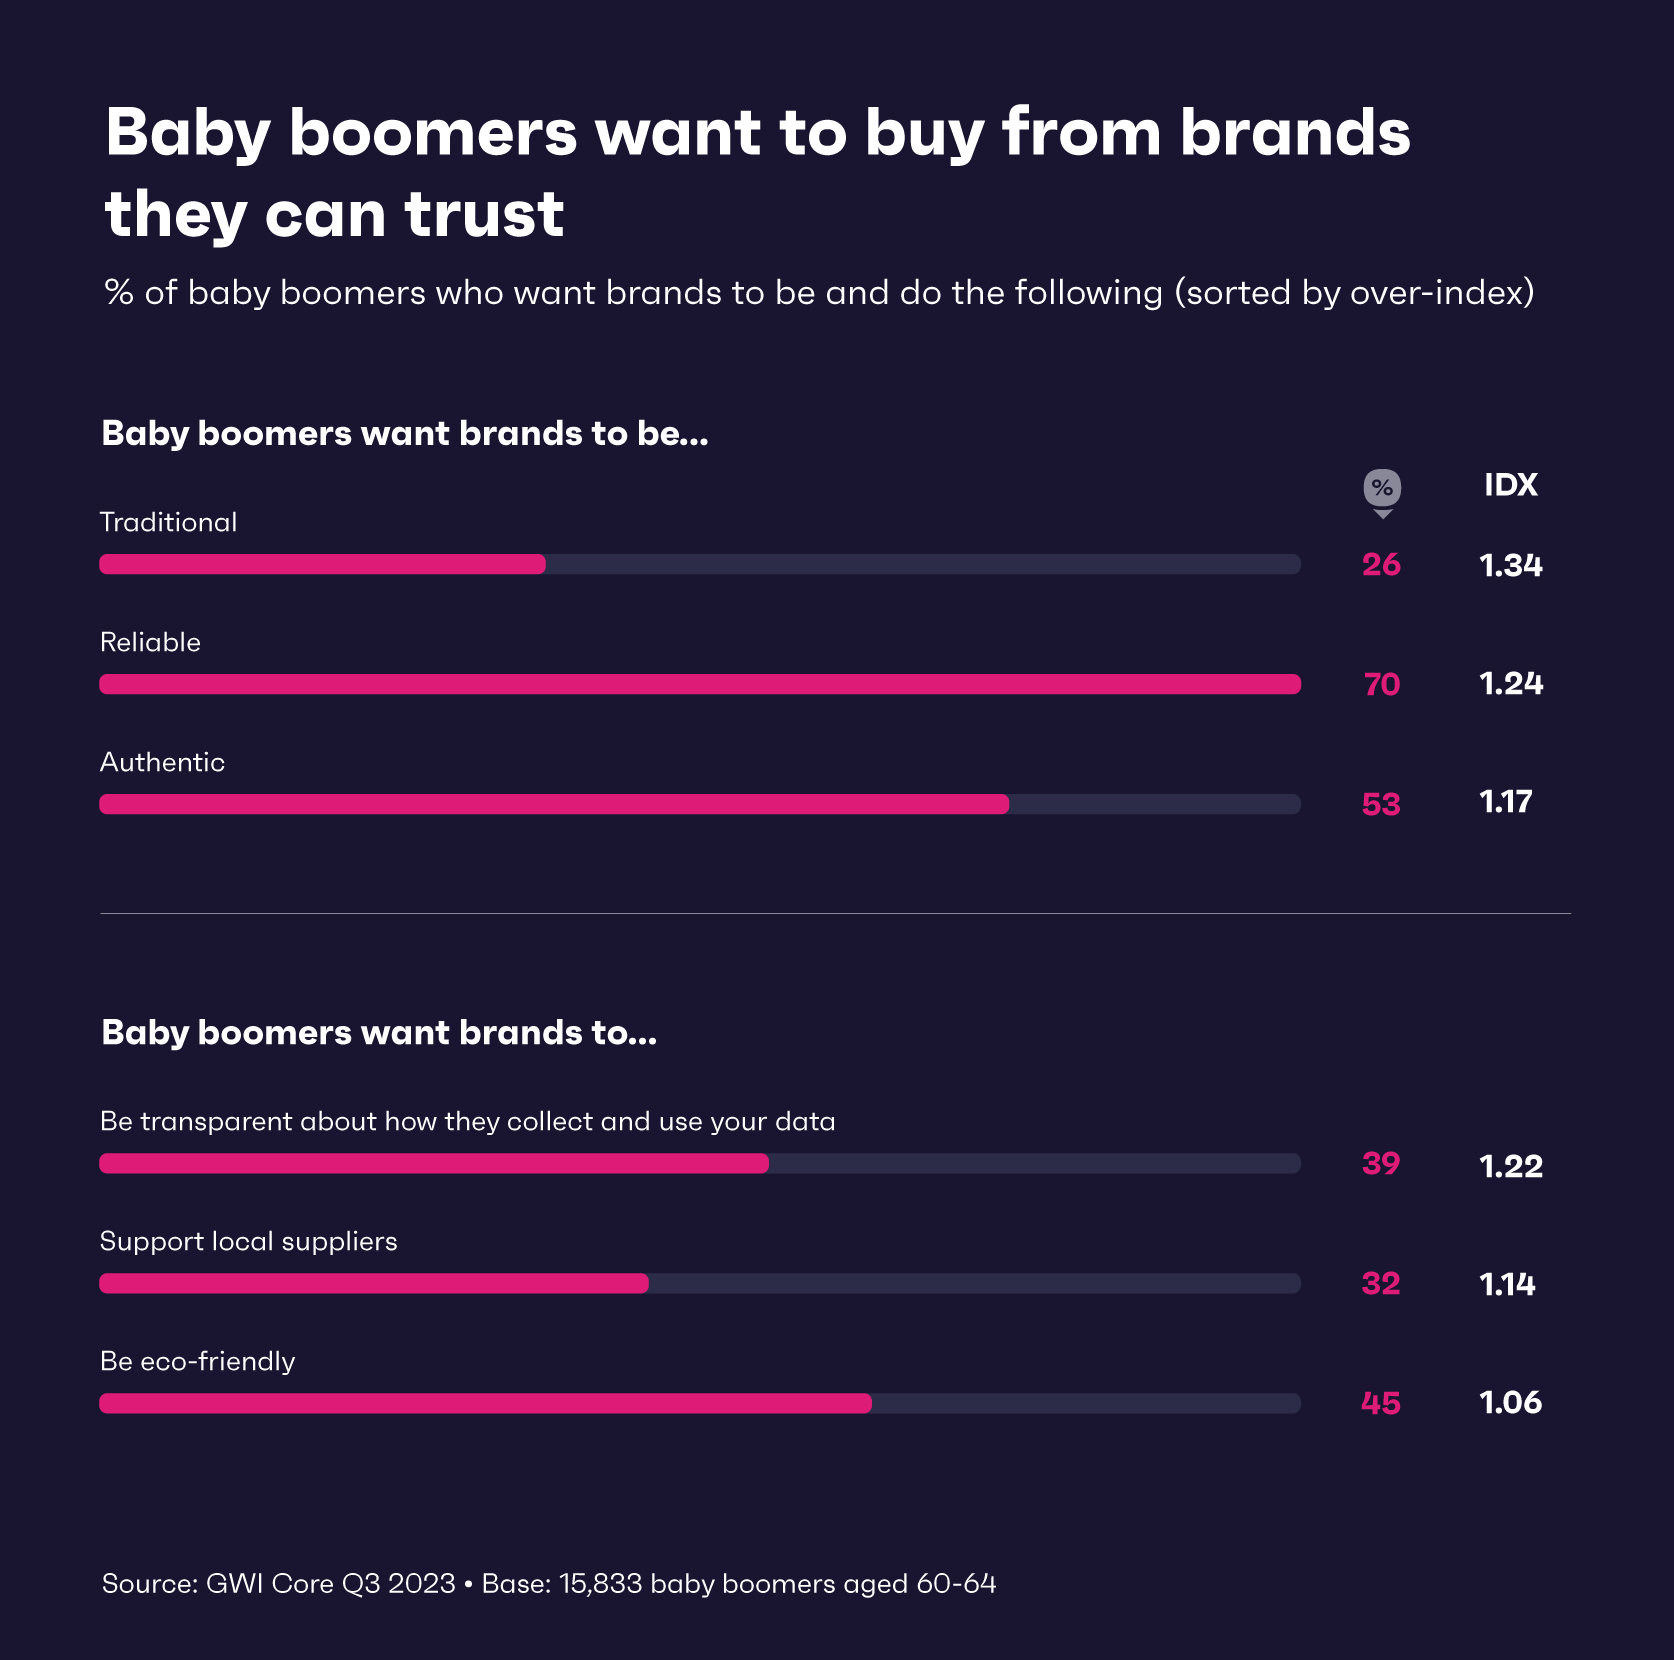 Chart showing what baby boomers want and expect from brands